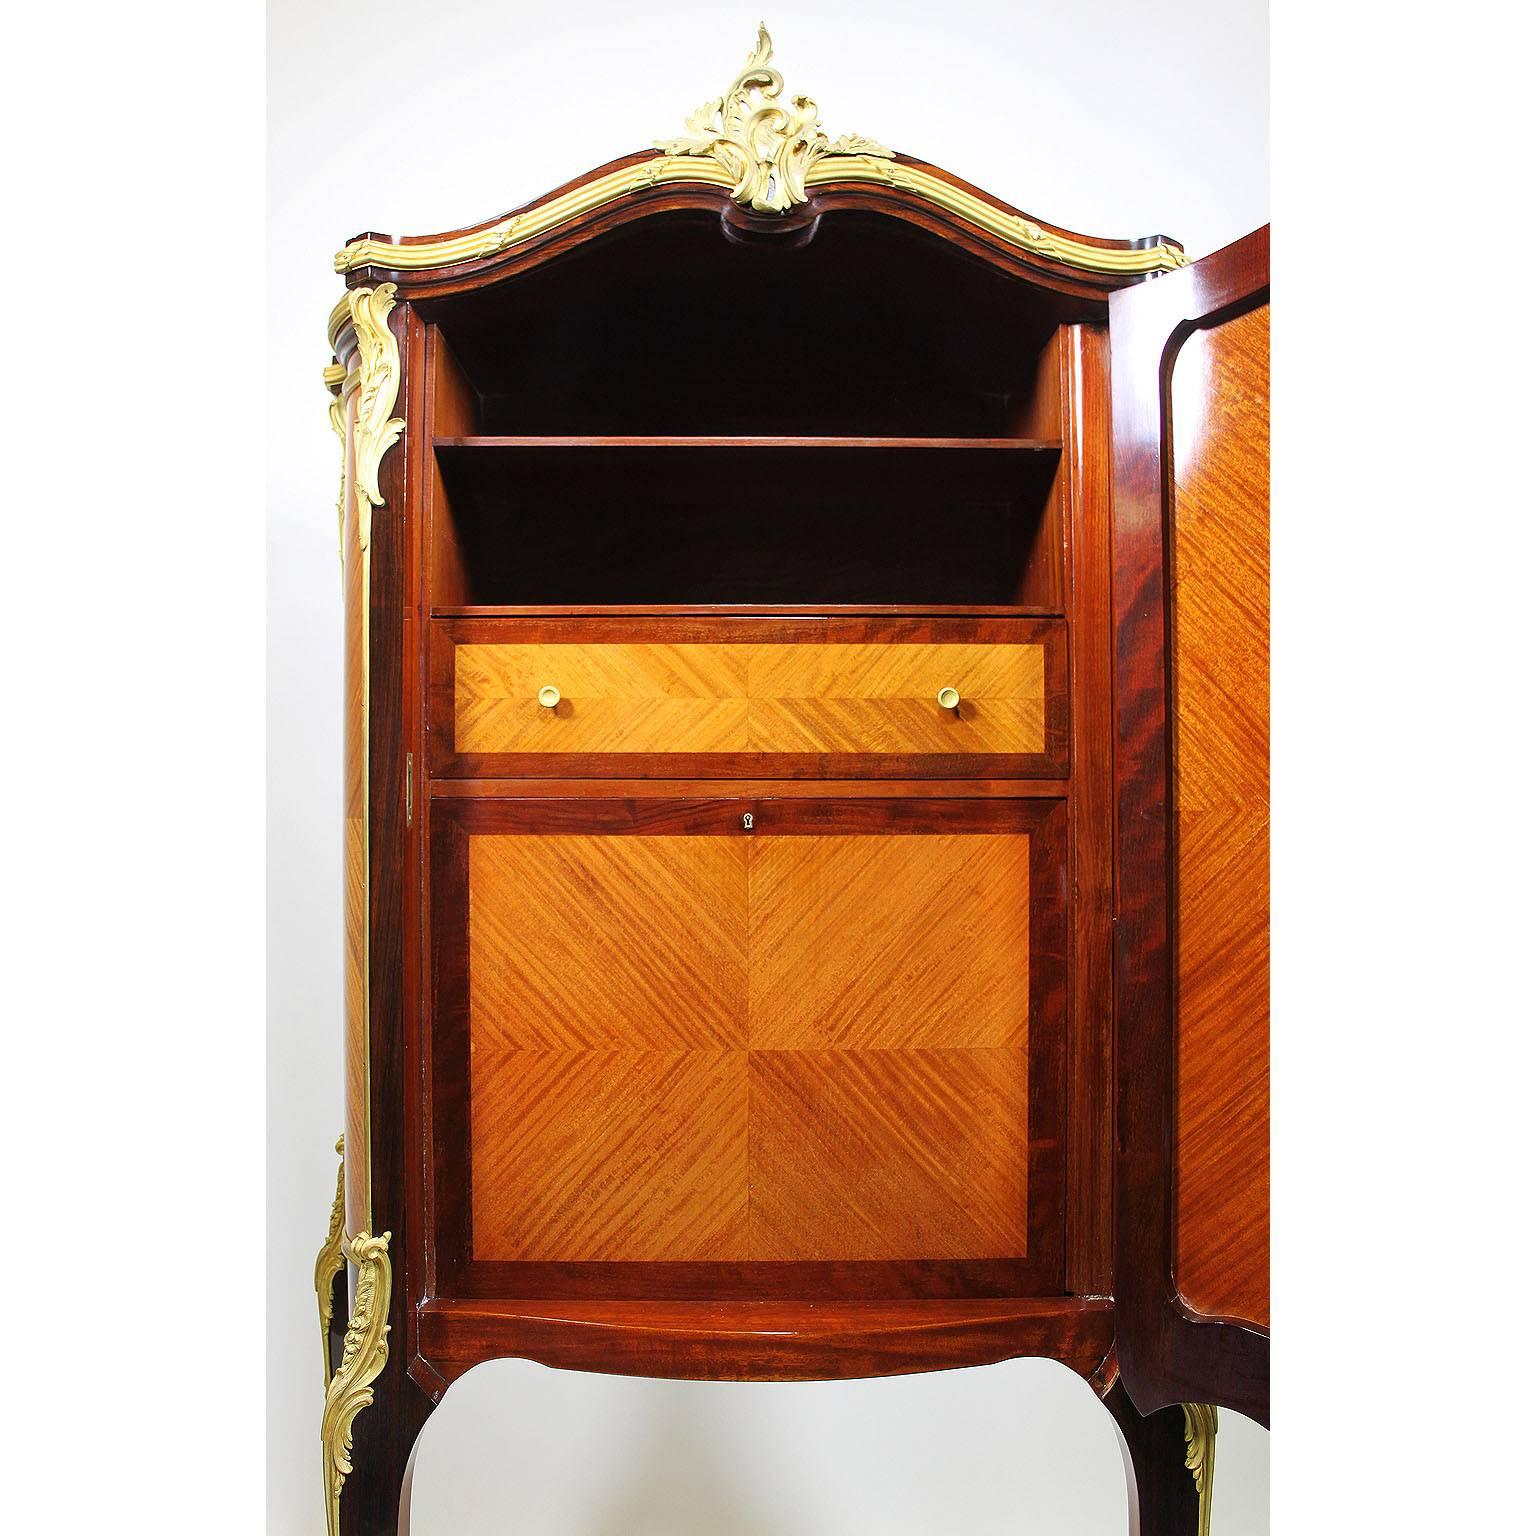 French 19th-20th Century Louis XV Style Gilt-Bronze Mounted & Marquetry Cabinet In Good Condition For Sale In Los Angeles, CA